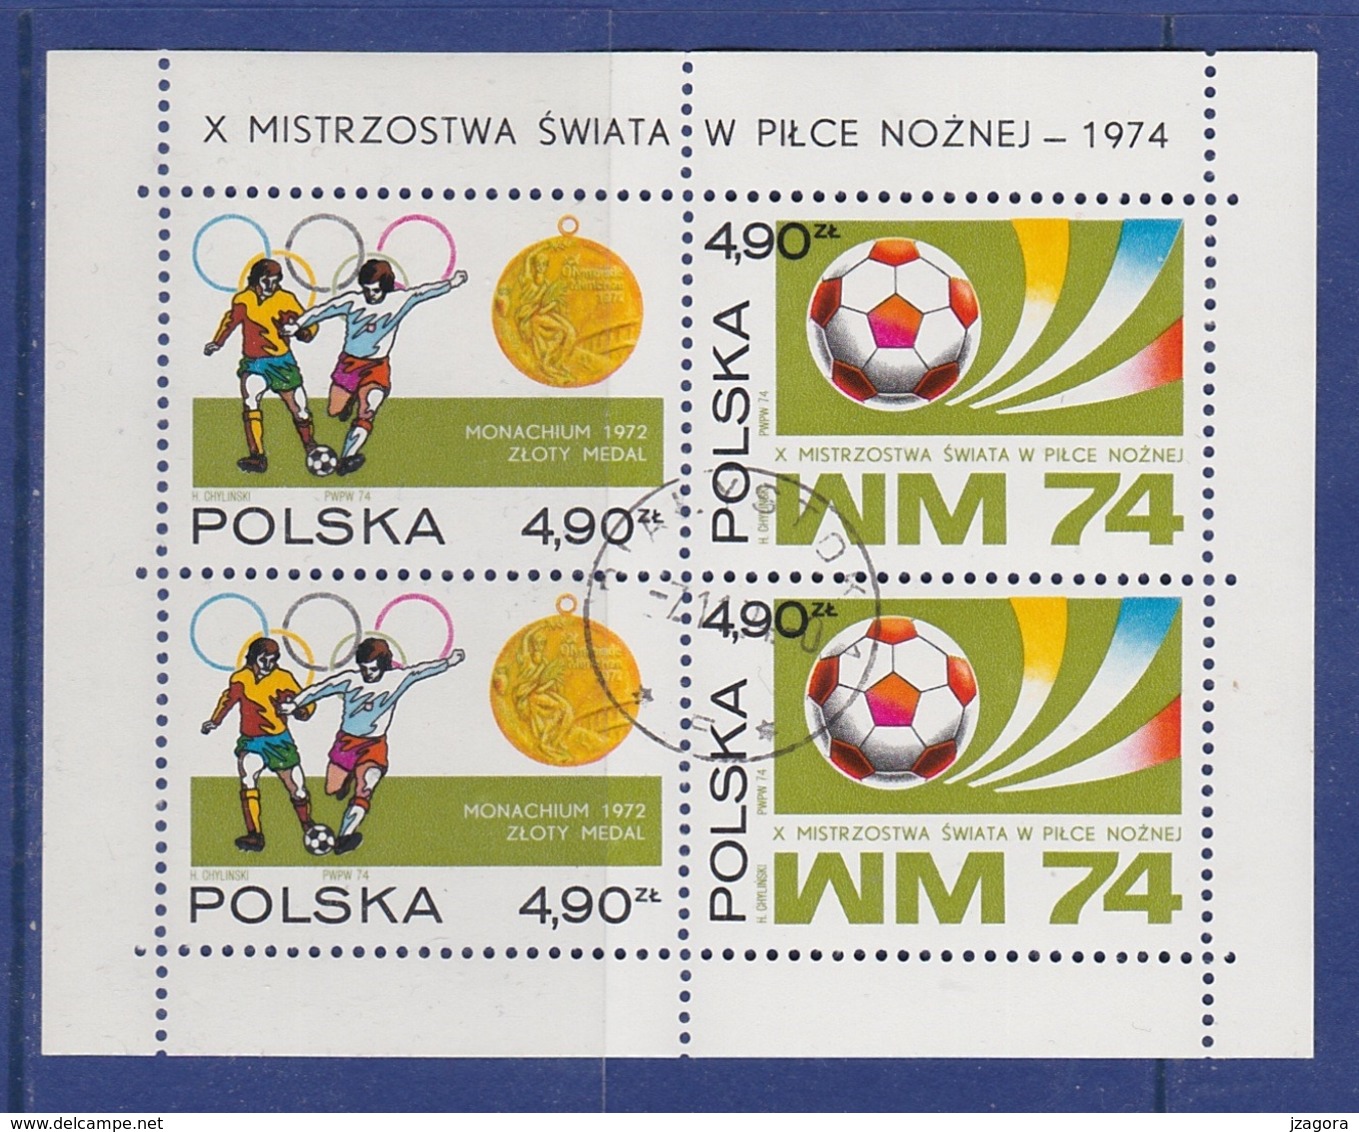 SOCCER FOOTBALL WORLD CHAMPIONSHIP MUNDIAL GERMANY 1974 POLAND POLEN POLOGNE SECOND PLACE Mi Bl. 59 Used With Gum - 1974 – Germania Ovest